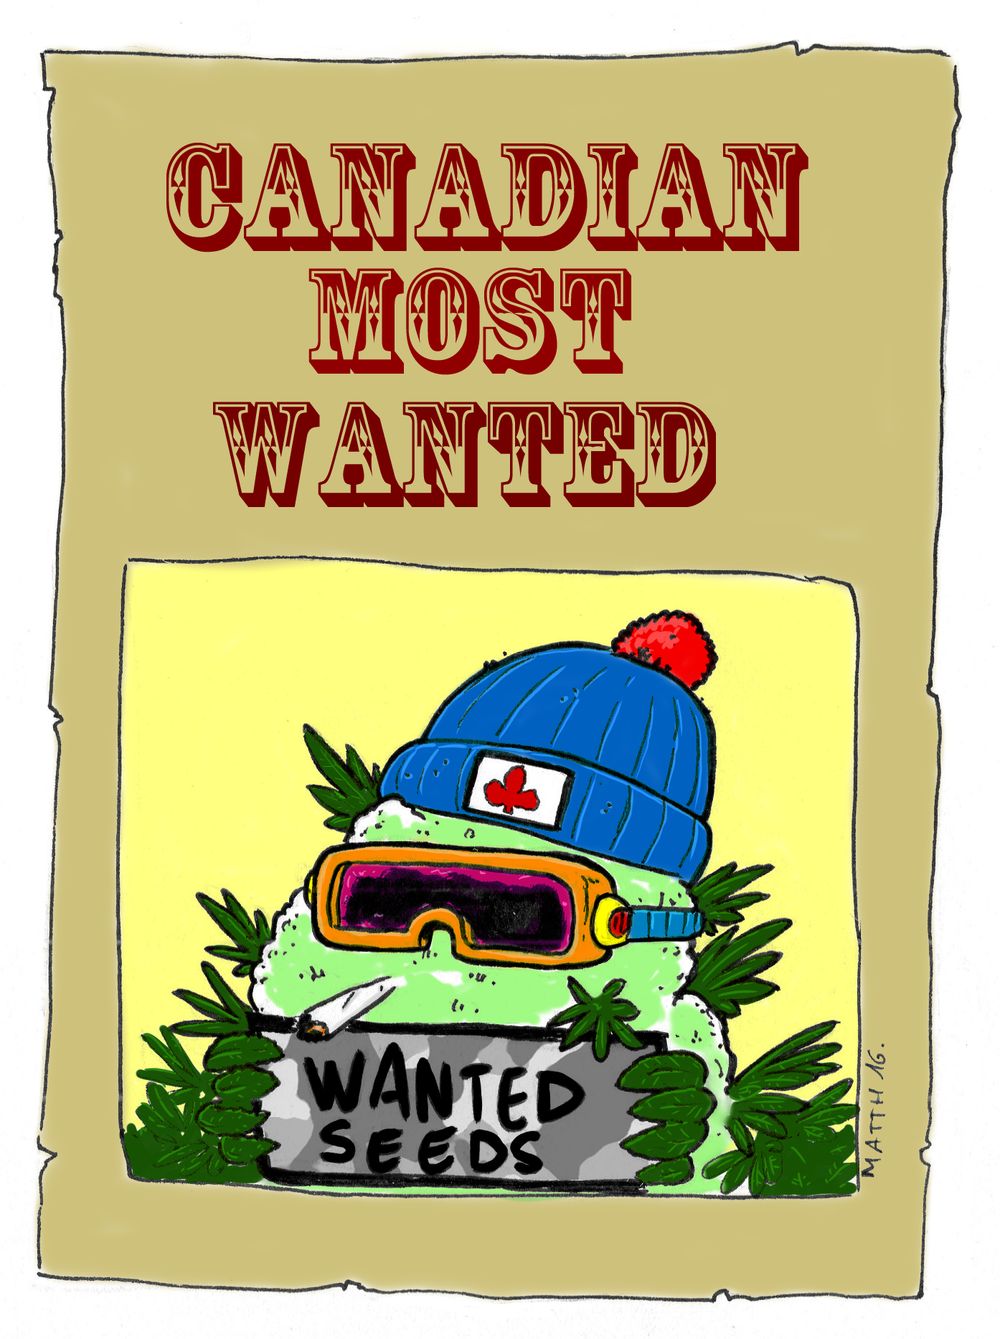 CANADIAN most wanted